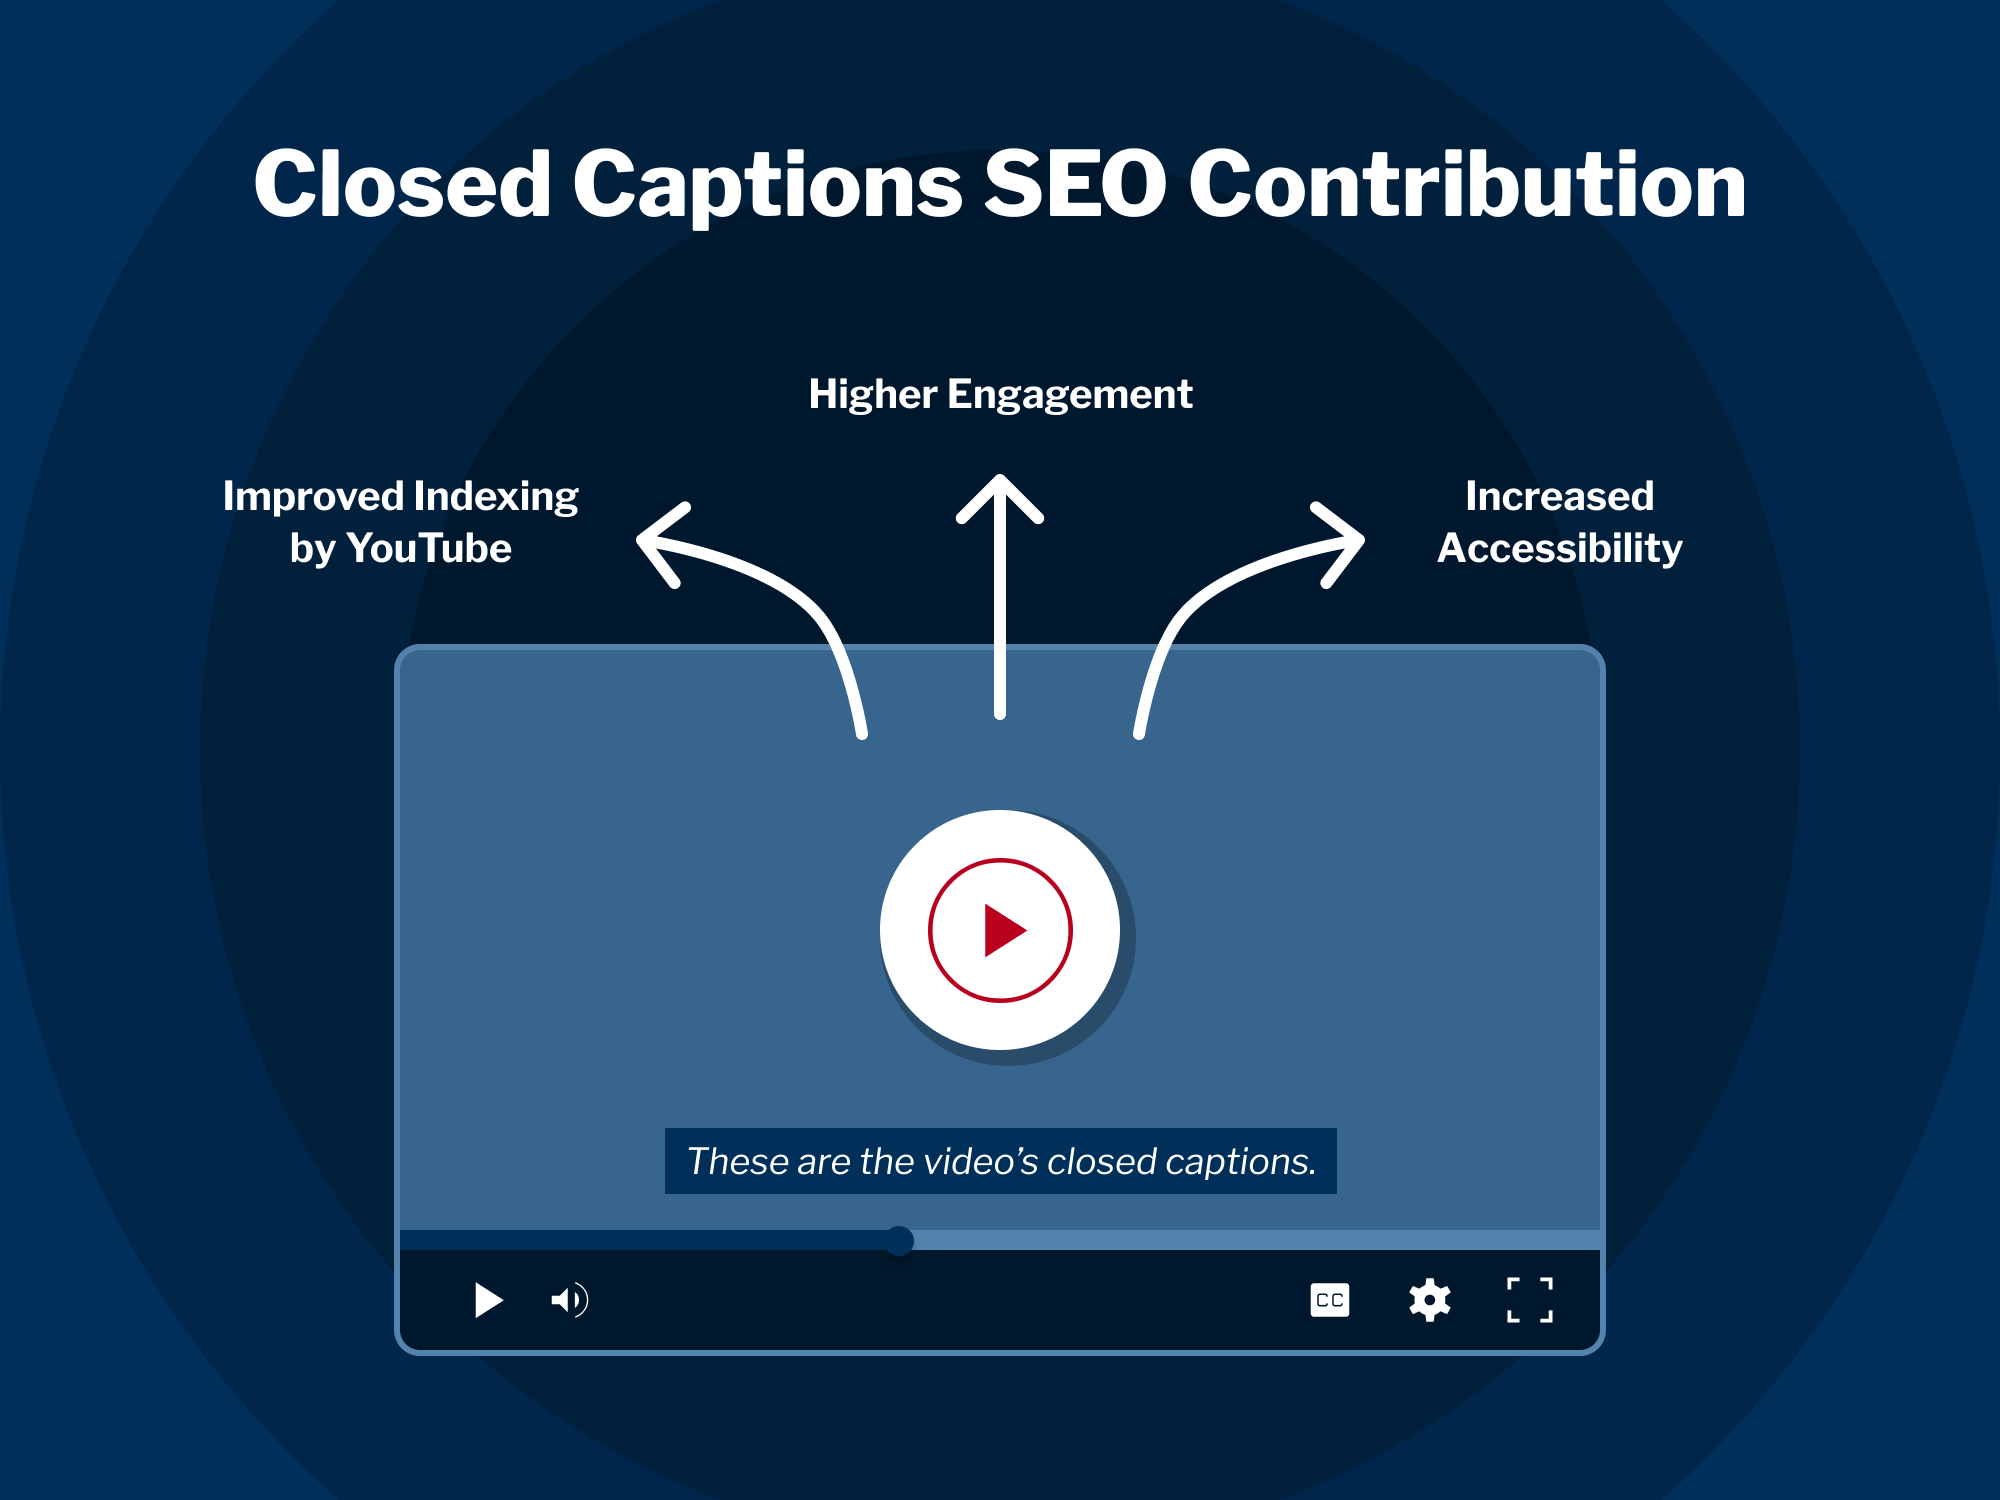  Illustration showing the SEO benefits of closed captions: Improved Indexing by YouTube, Higher Engagement, and Increased Web Accessibility.